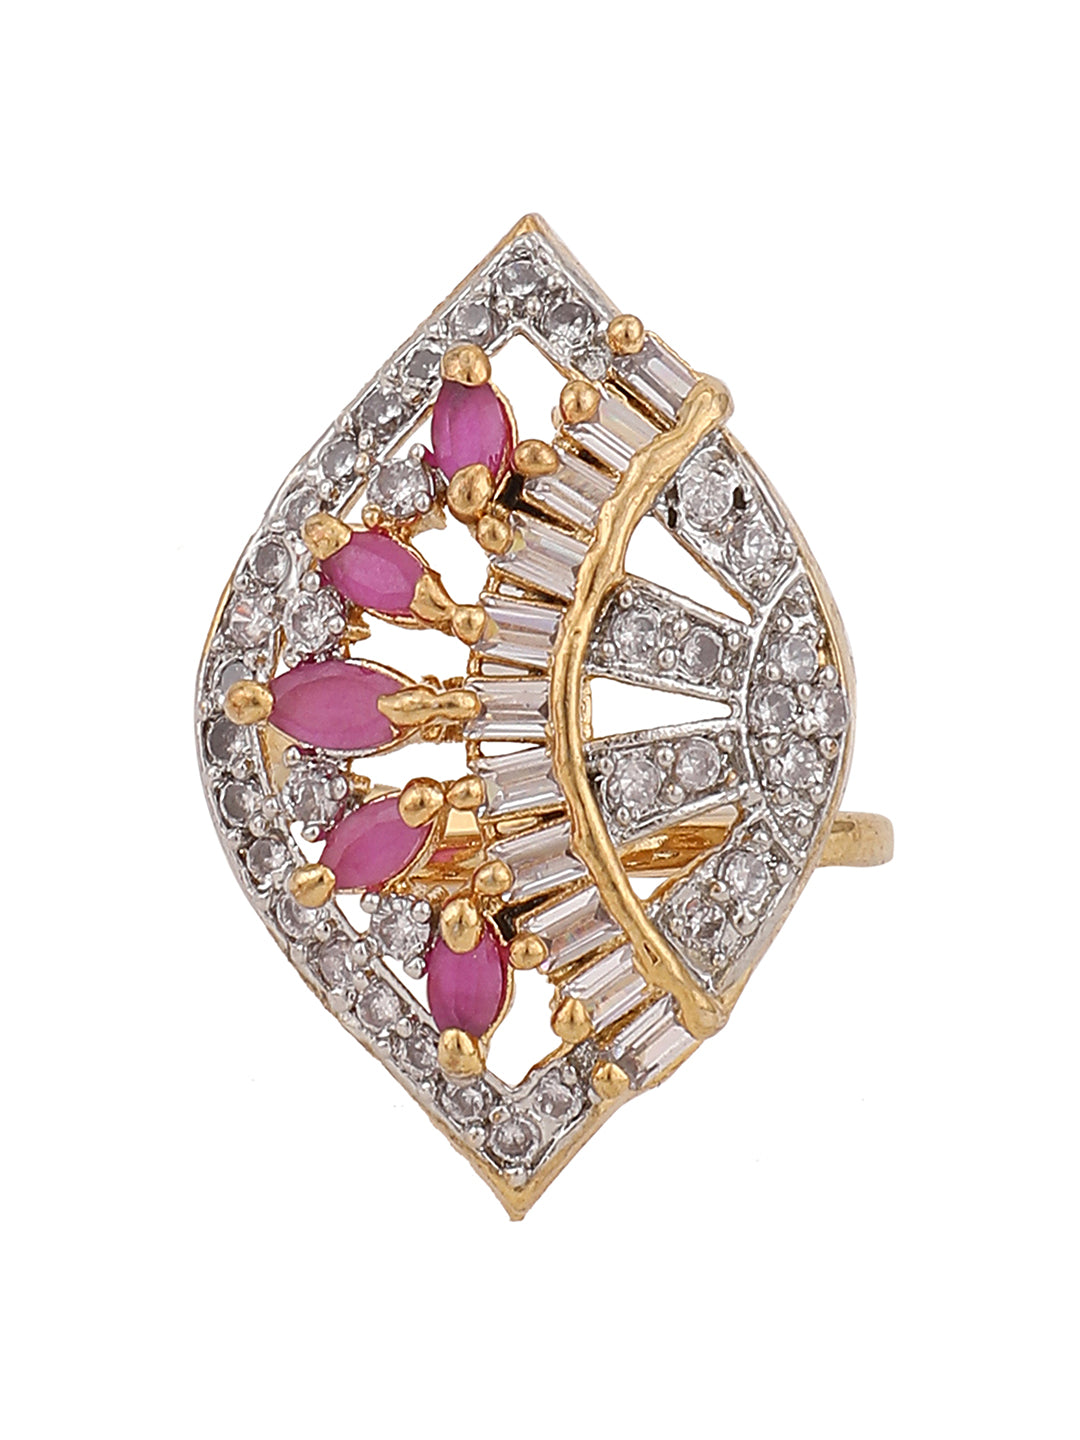 Women's Gold-Plated White Ad-Studded Handcrafted Adjustable Finger Ring - Anikas Creation